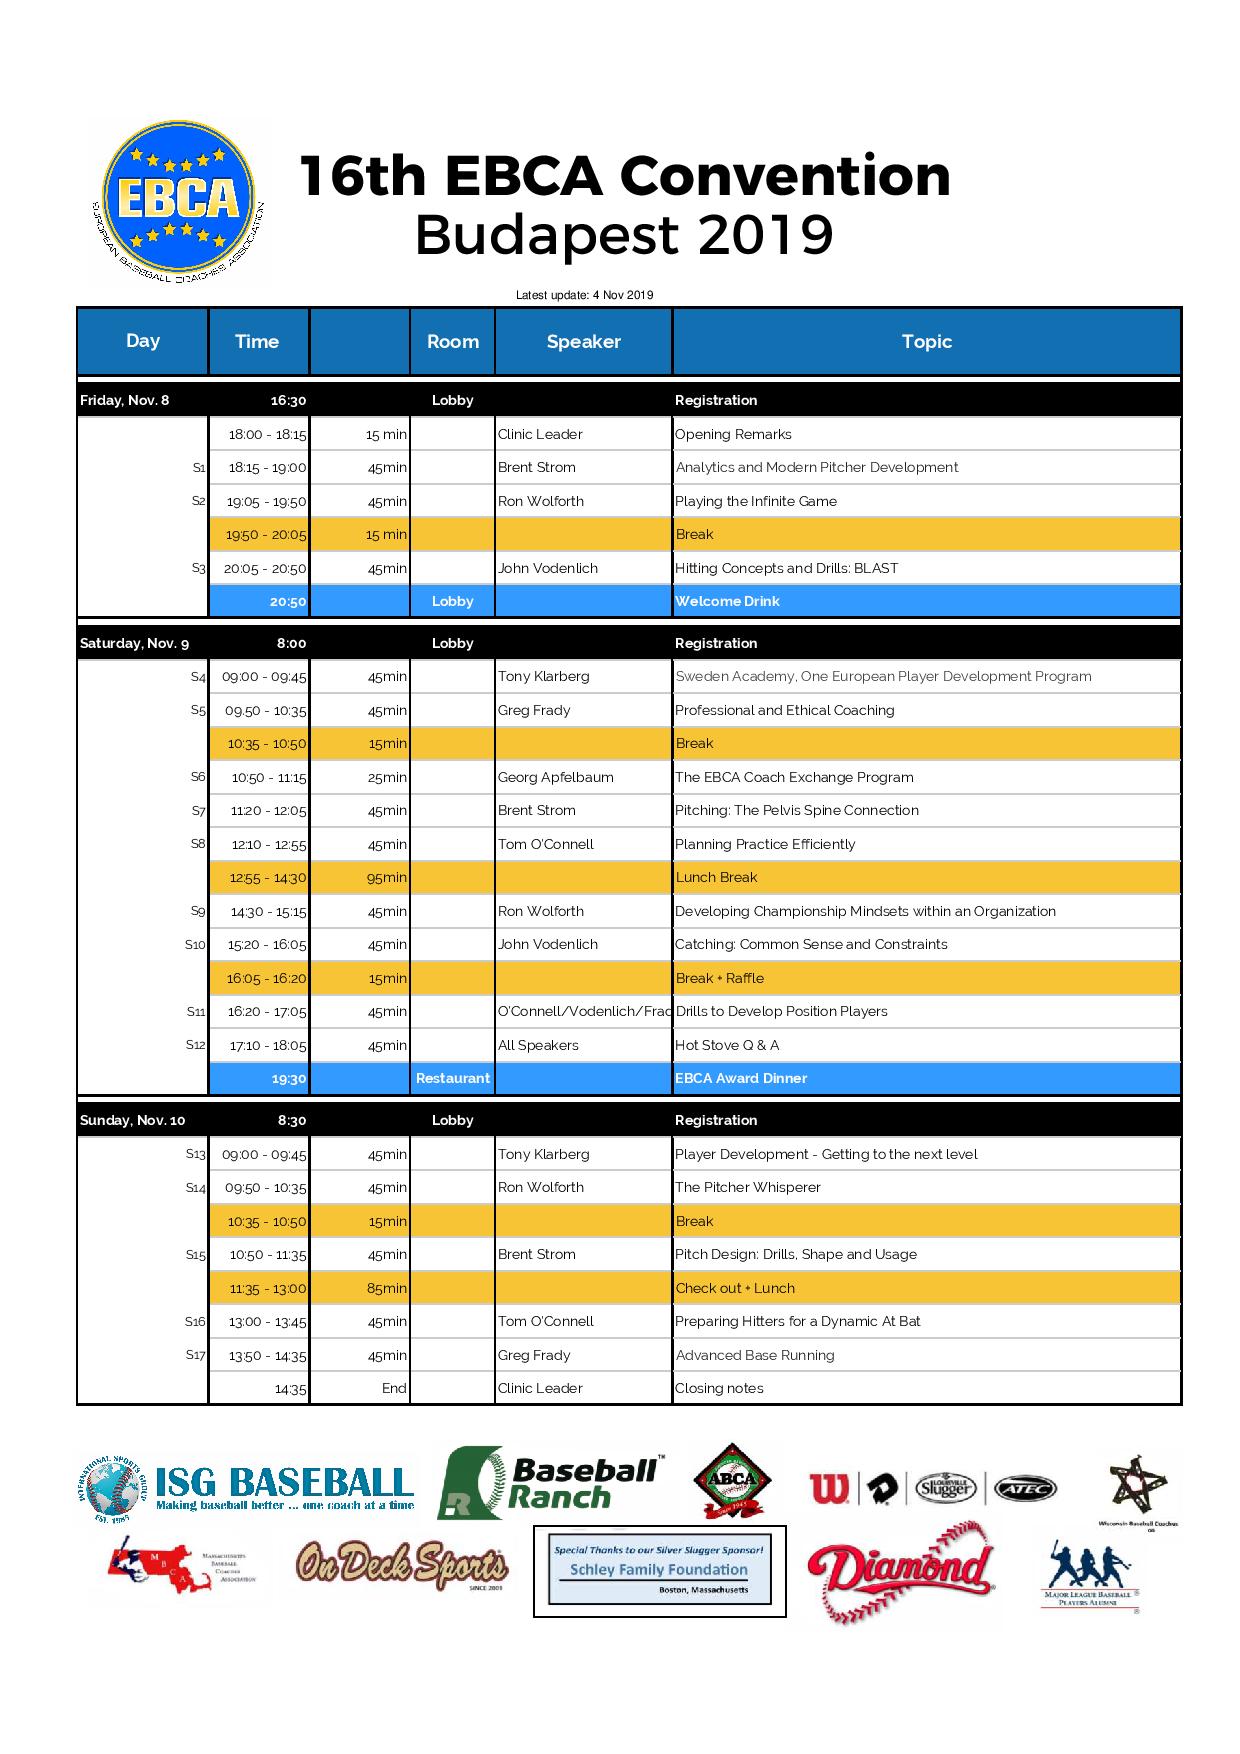 Convention Schedule - 16th EBCA Convention 2019 @ Budapest (H)